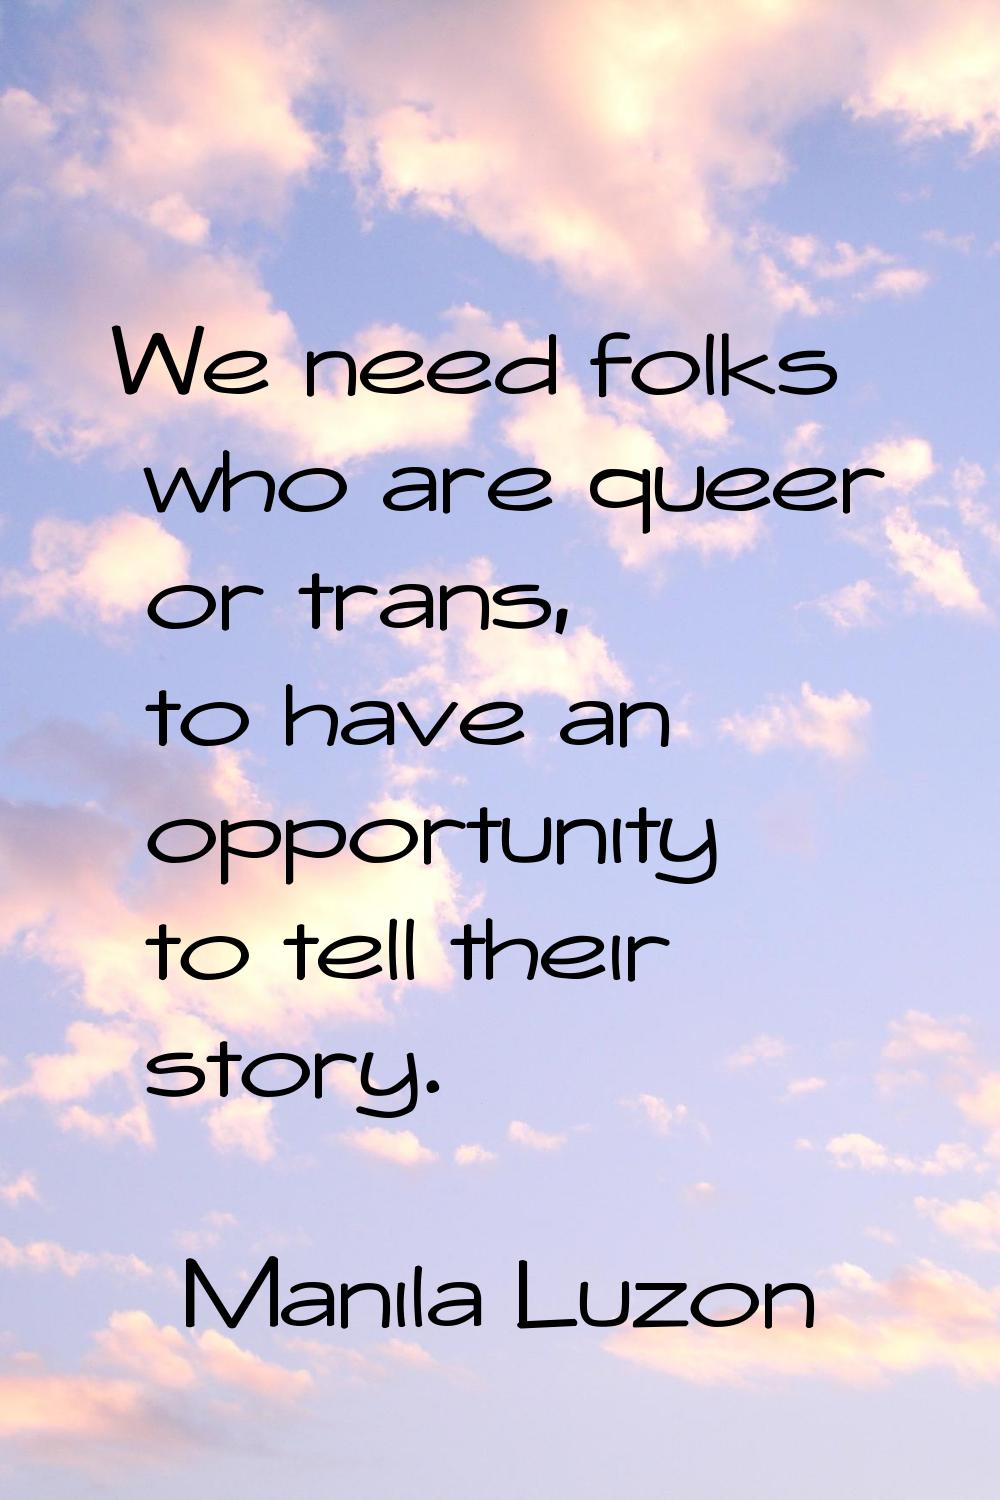 We need folks who are queer or trans, to have an opportunity to tell their story.